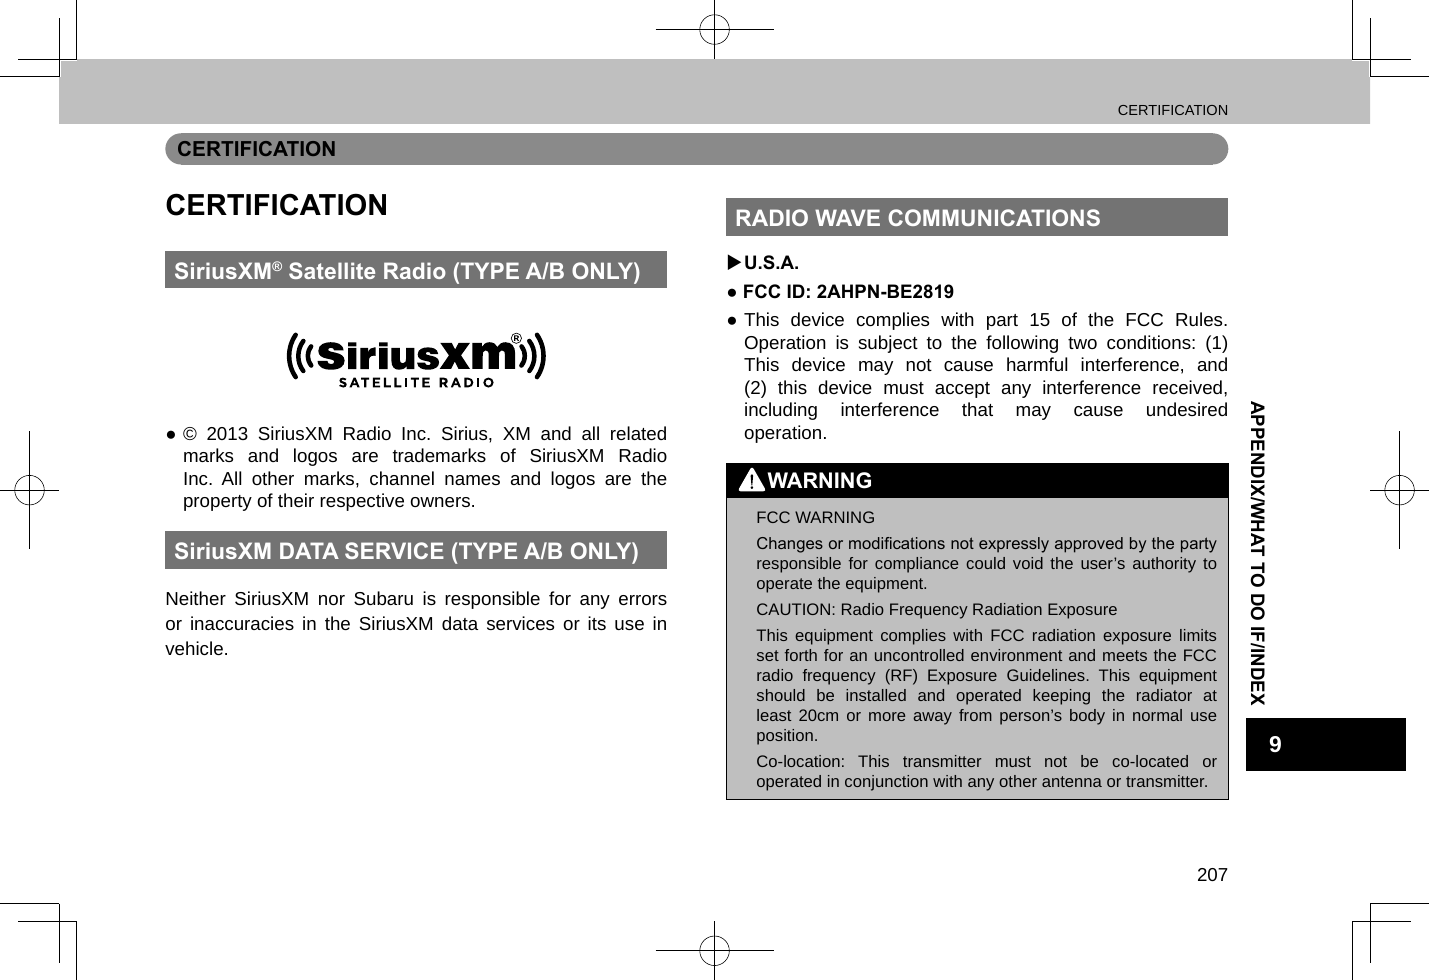 CERTIFICATION207APPENDIX/WHAT TO DO IF/INDEX9CERTIFICATIONCERTIFICATIONSiriusXM® Satellite Radio (TYPE A/B ONLY) ●© 2013 SiriusXM Radio Inc. Sirius, XM and all related marks and logos are trademarks of SiriusXM Radio Inc. All other marks, channel names and logos are the property of their respective owners.SiriusXM DATA SERVICE (TYPE A/B ONLY)Neither SiriusXM nor Subaru is responsible for any errors or inaccuracies in the SiriusXM data services or its use in vehicle.RADIO WAVE COMMUNICATIONS XU.S.A.● FCC ID: 2AHPN-BE2819 ●This device complies with part 15 of the FCC Rules. Operation is subject to the following two conditions: (1) This device may not cause harmful interference, and (2) this device must accept any interference received, including interference that may cause undesired operation.WARNING lFCC WARNINGChanges or modications not expressly approved by the party responsible for compliance could void the user’s authority to operate the equipment. lCAUTION: Radio Frequency Radiation ExposureThis equipment complies with FCC radiation exposure limits set forth for an uncontrolled environment and meets the FCC radio frequency (RF) Exposure Guidelines. This equipment should be installed and operated keeping the radiator at least 20cm or more away from person’s body in normal use position. lCo-location: This transmitter must not be co-located or operated in conjunction with any other antenna or transmitter.